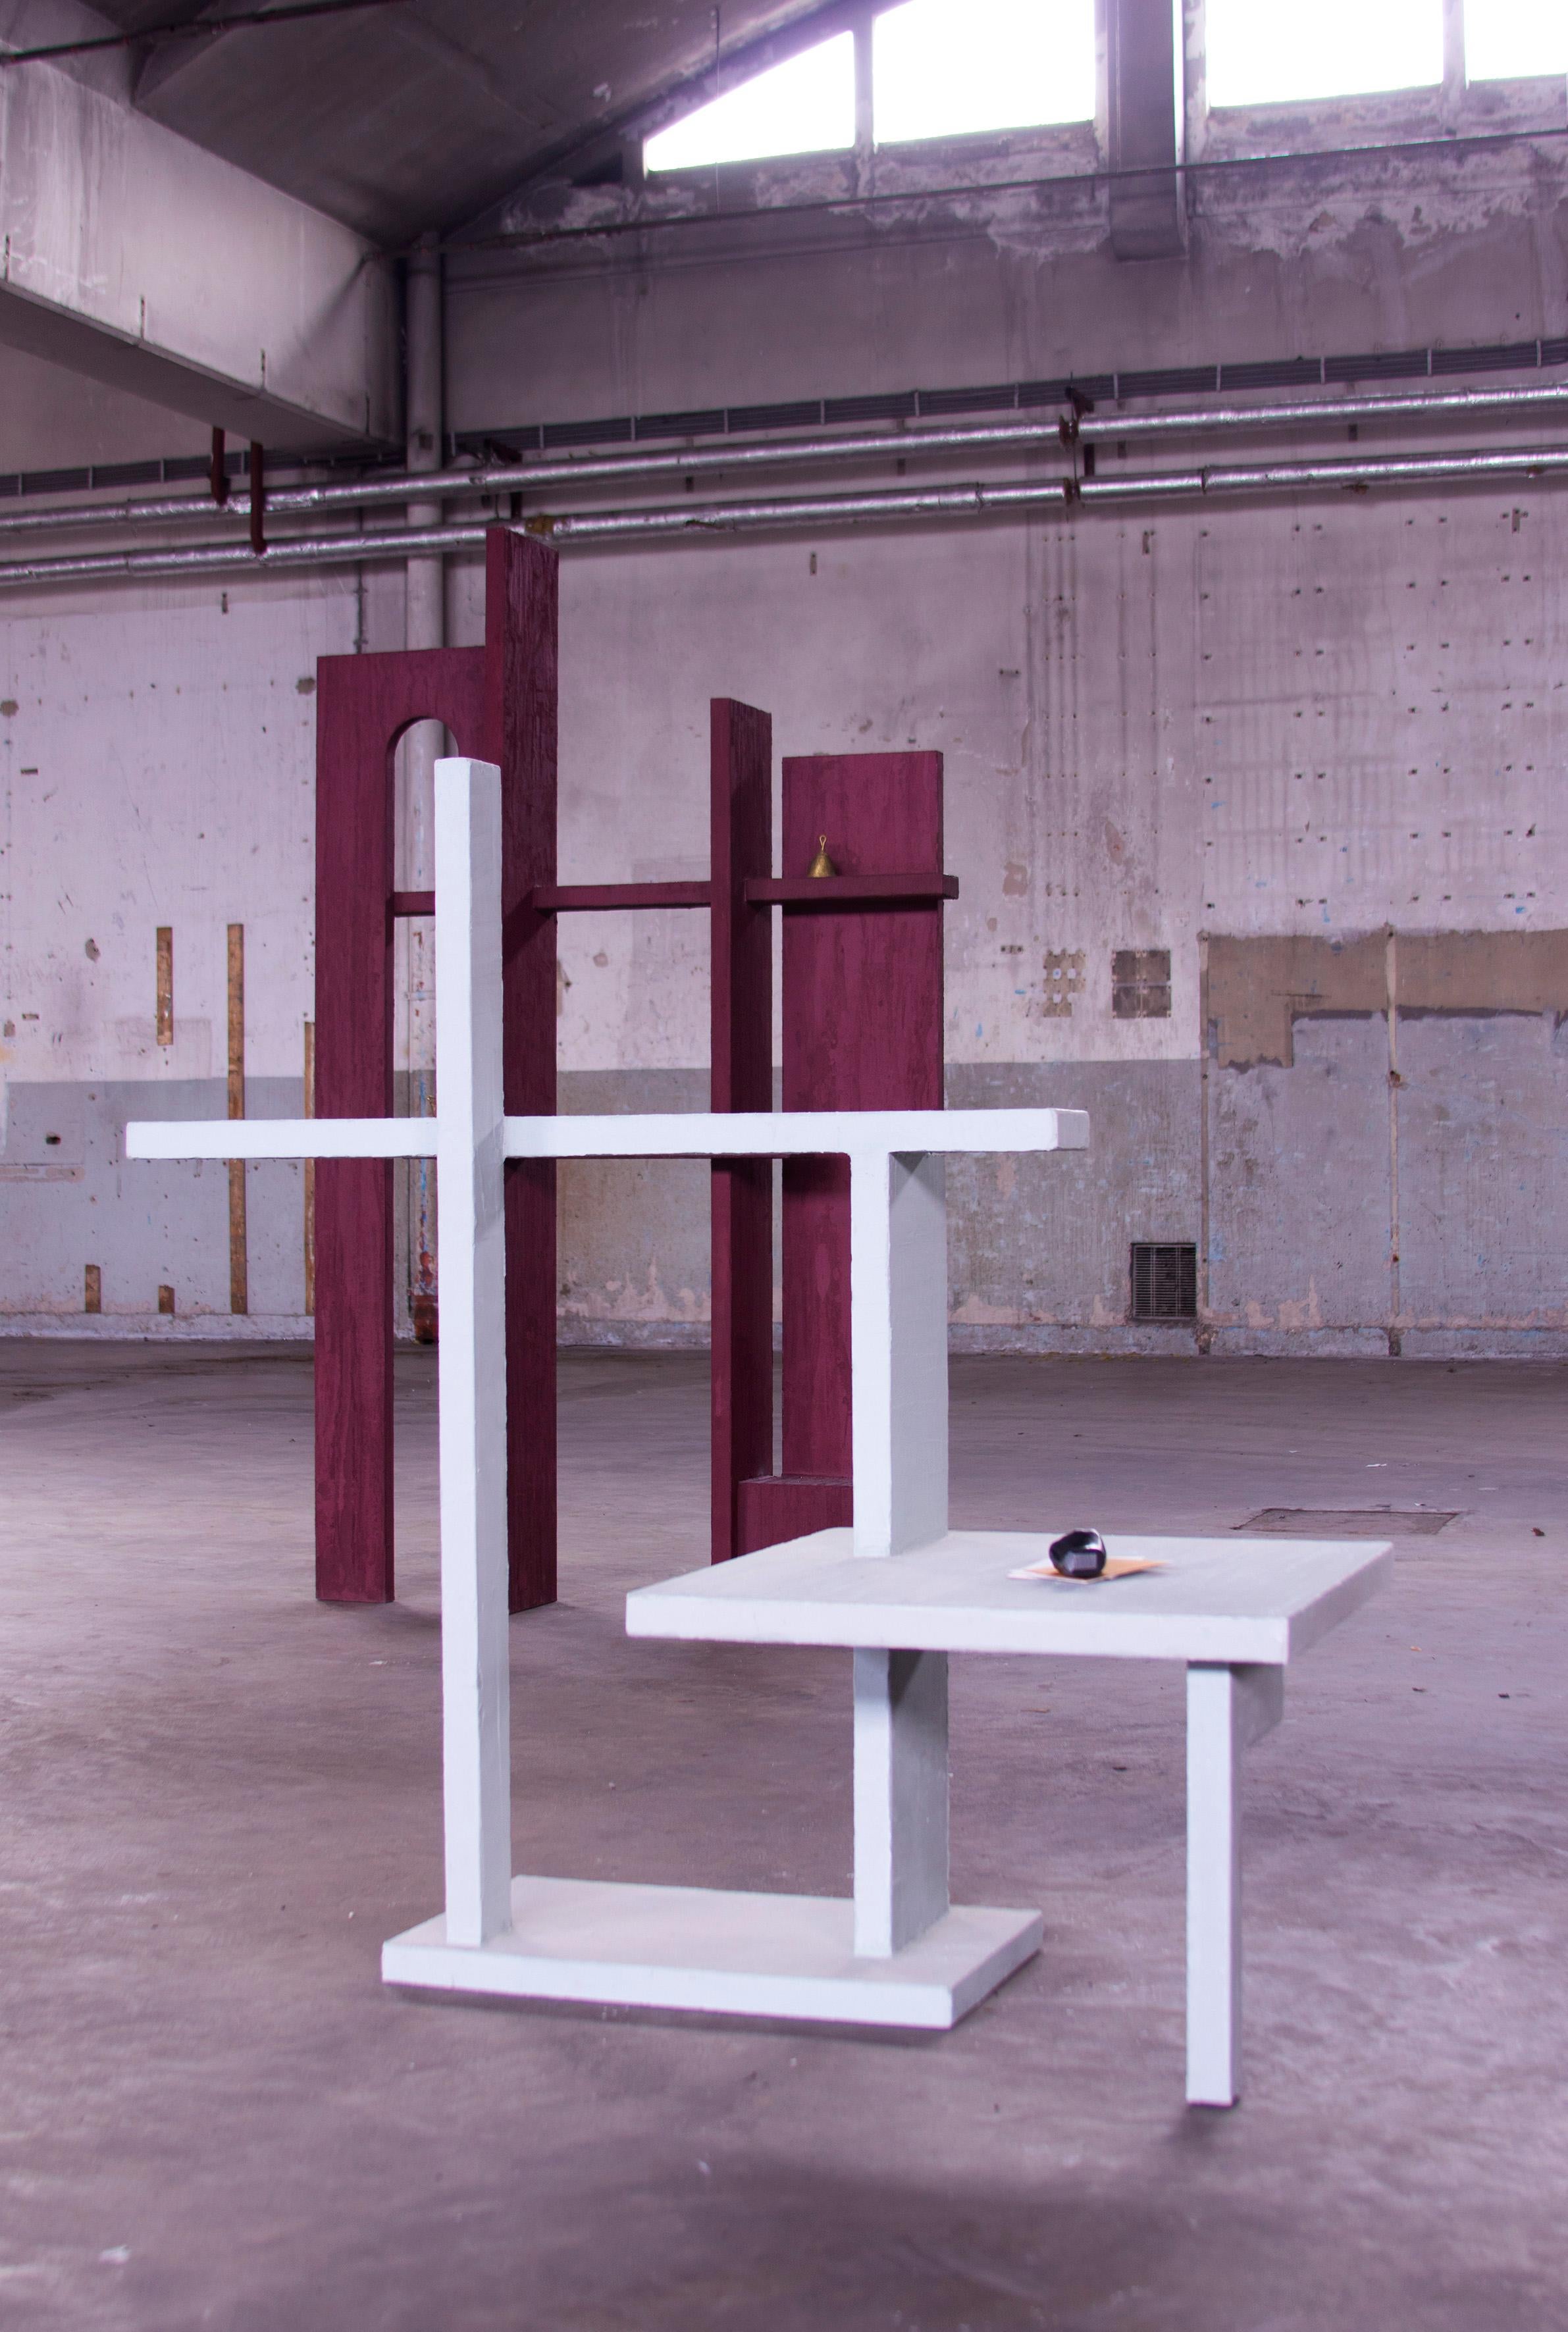 Space Poetry is a collection of sculptural objects in which Kiki van Eijk researches the relationship between space and architecture. Her findings are translating into a series of pieces: room dividers. bookshelves. Accent table. Entry consoles that